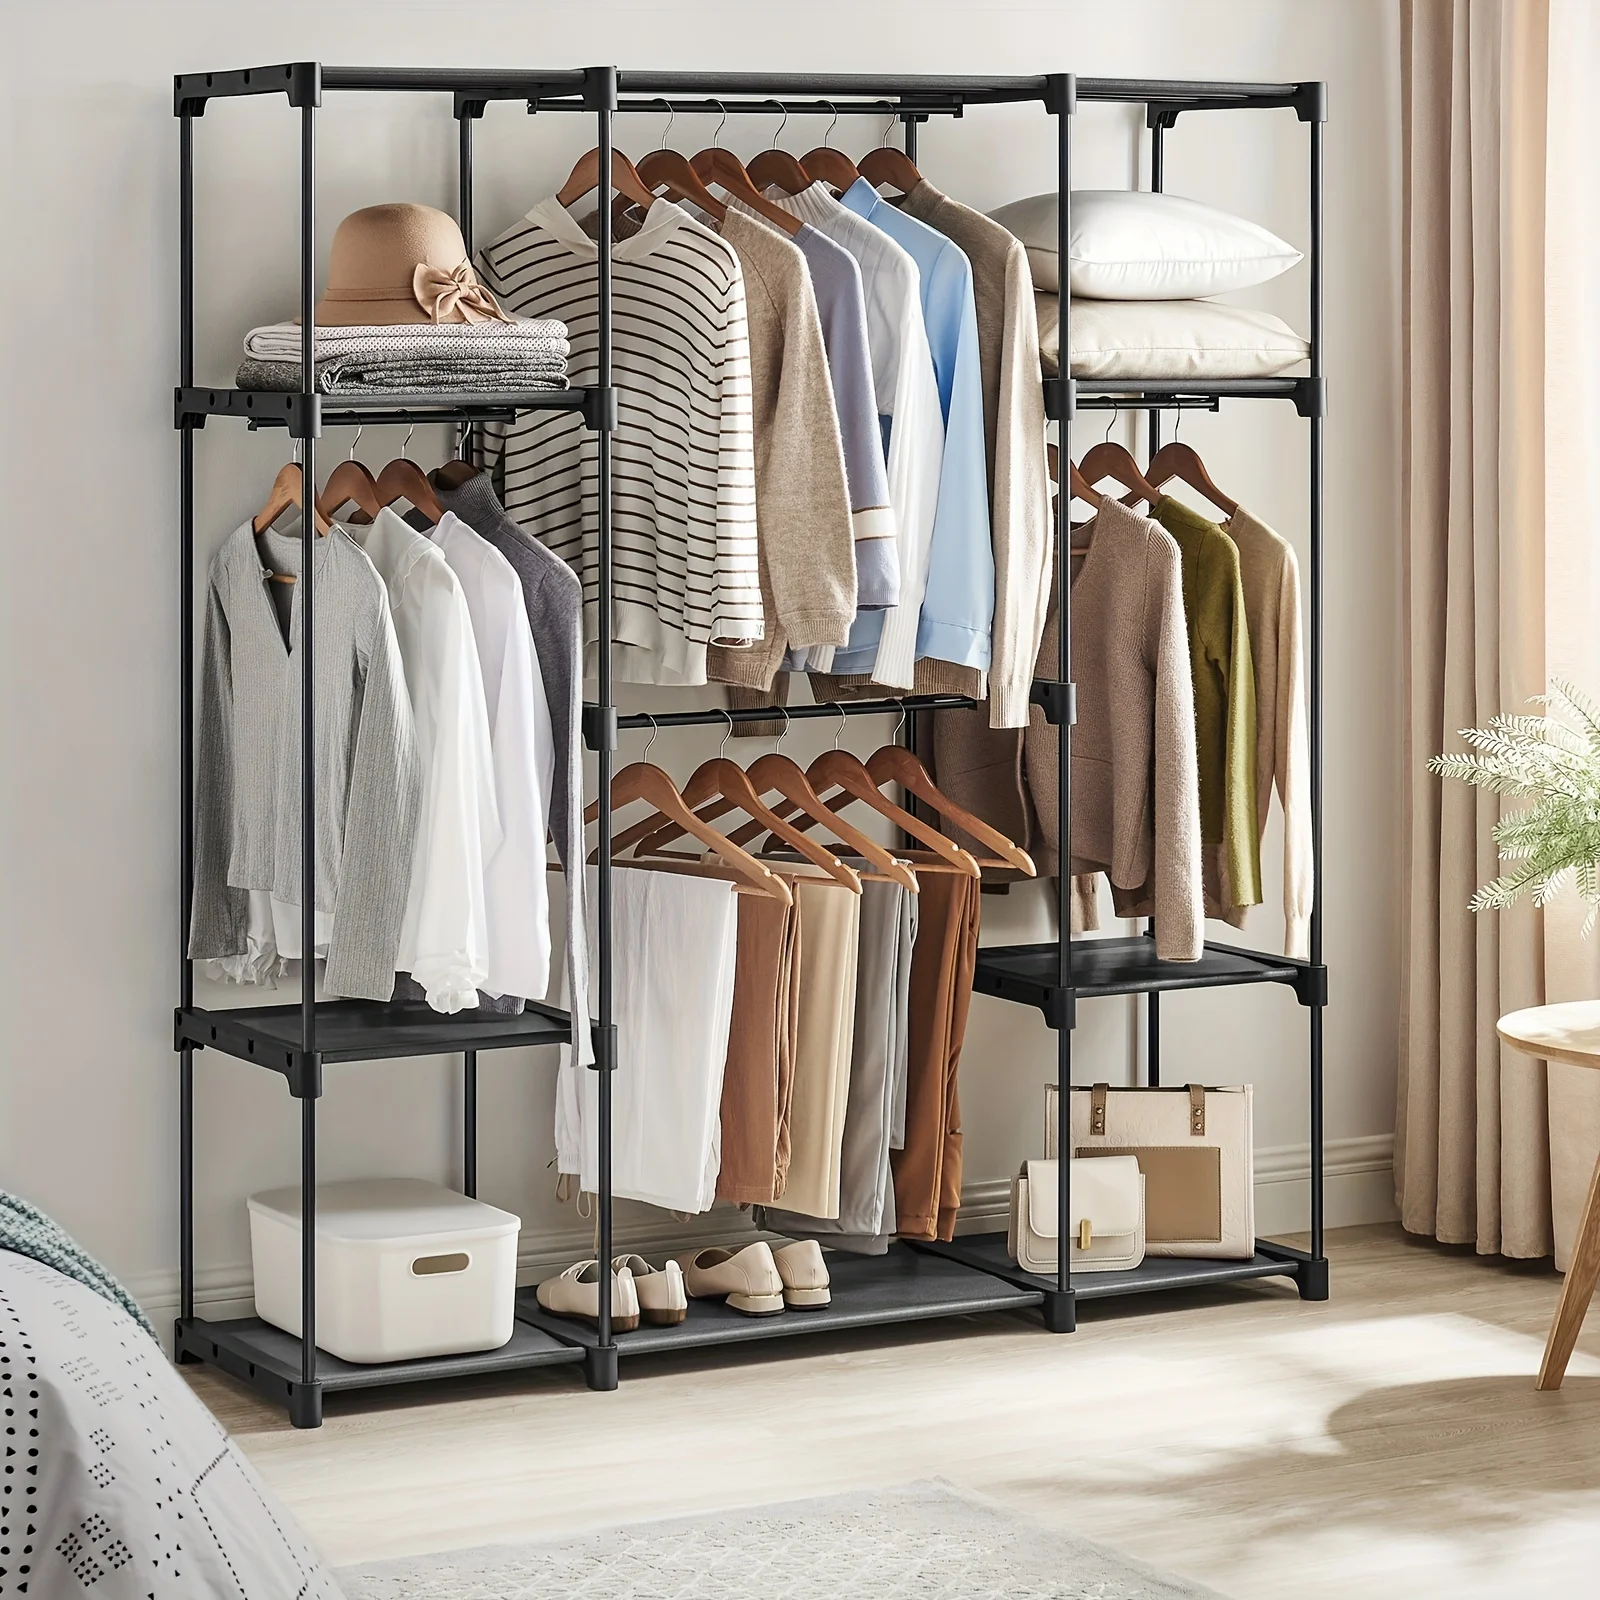 

Portable Closet, Freestanding Closet Organizer, Clothes Rack with Shelves, Hanging Rods, Storage Organizer, for Cloakroom, Bedro